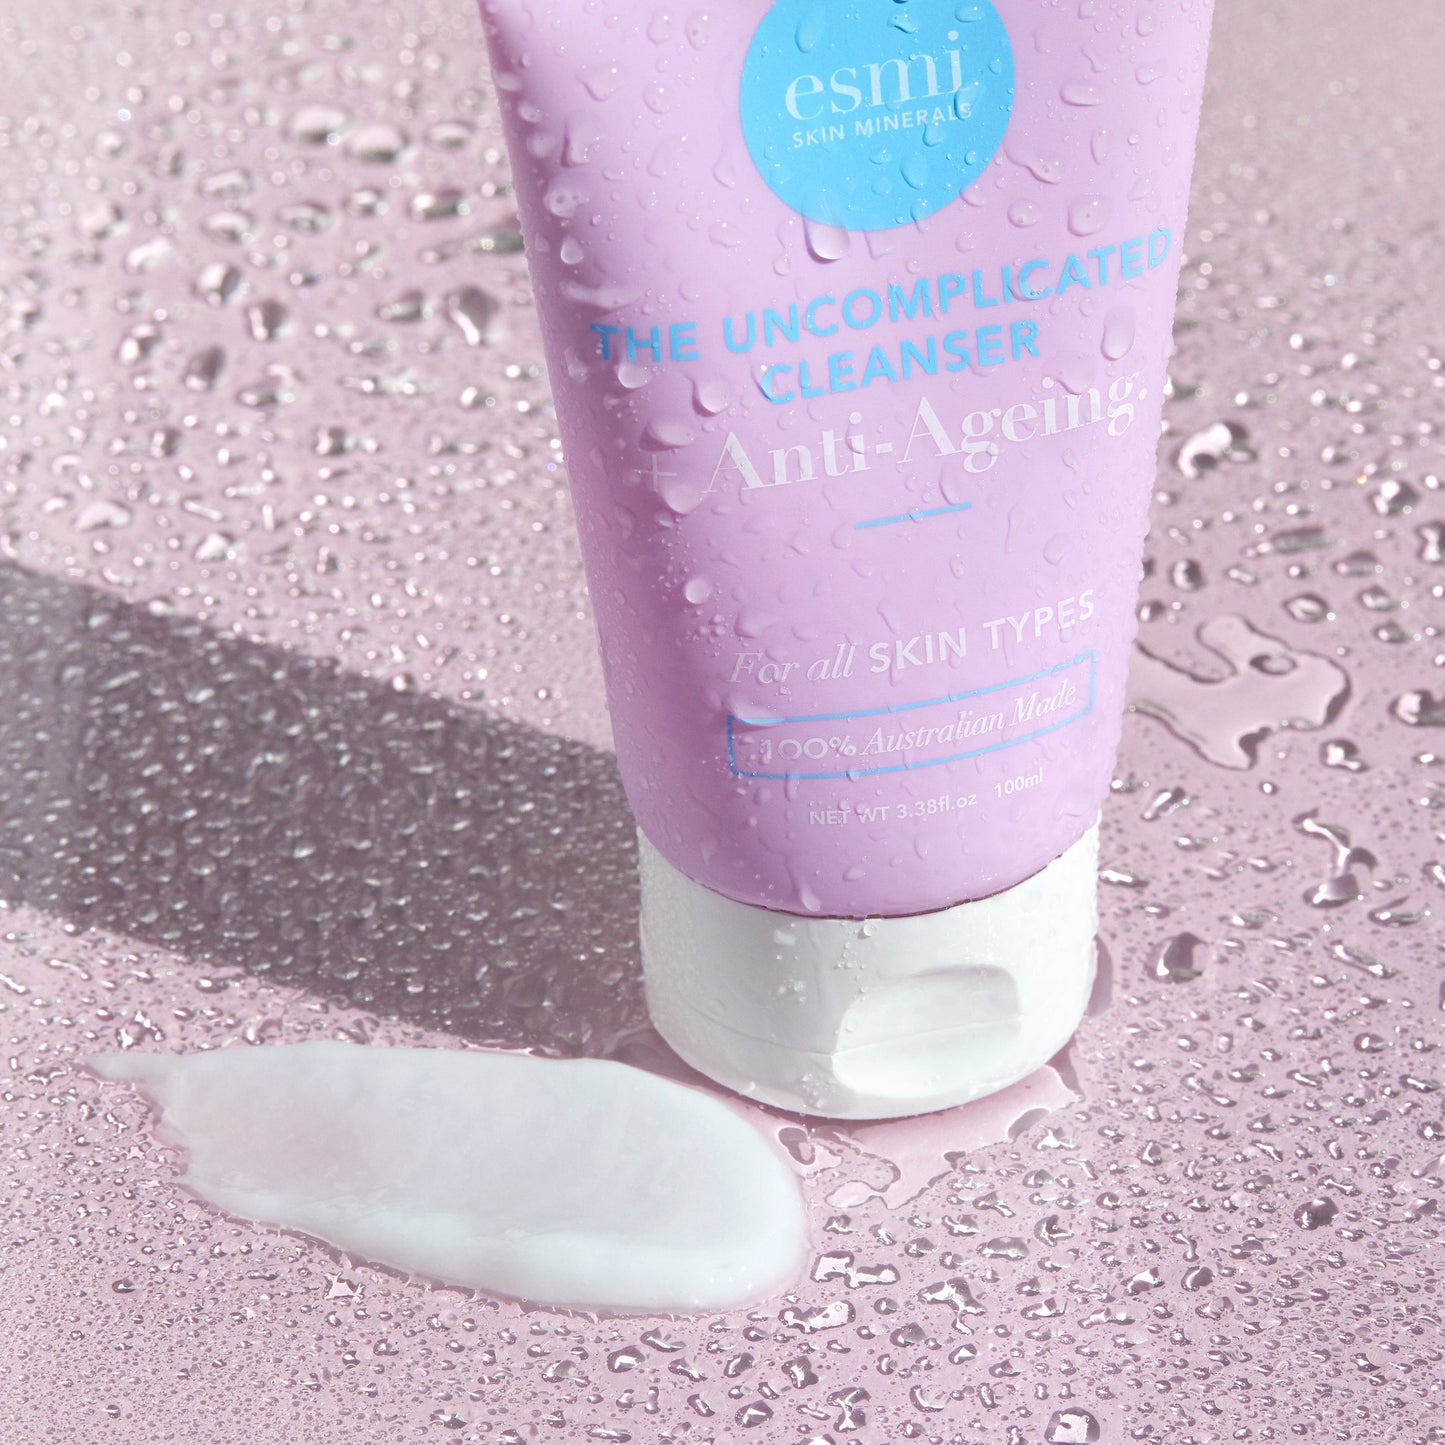 The Uncomplicated Cleanser plus Anti-Ageing 100ml